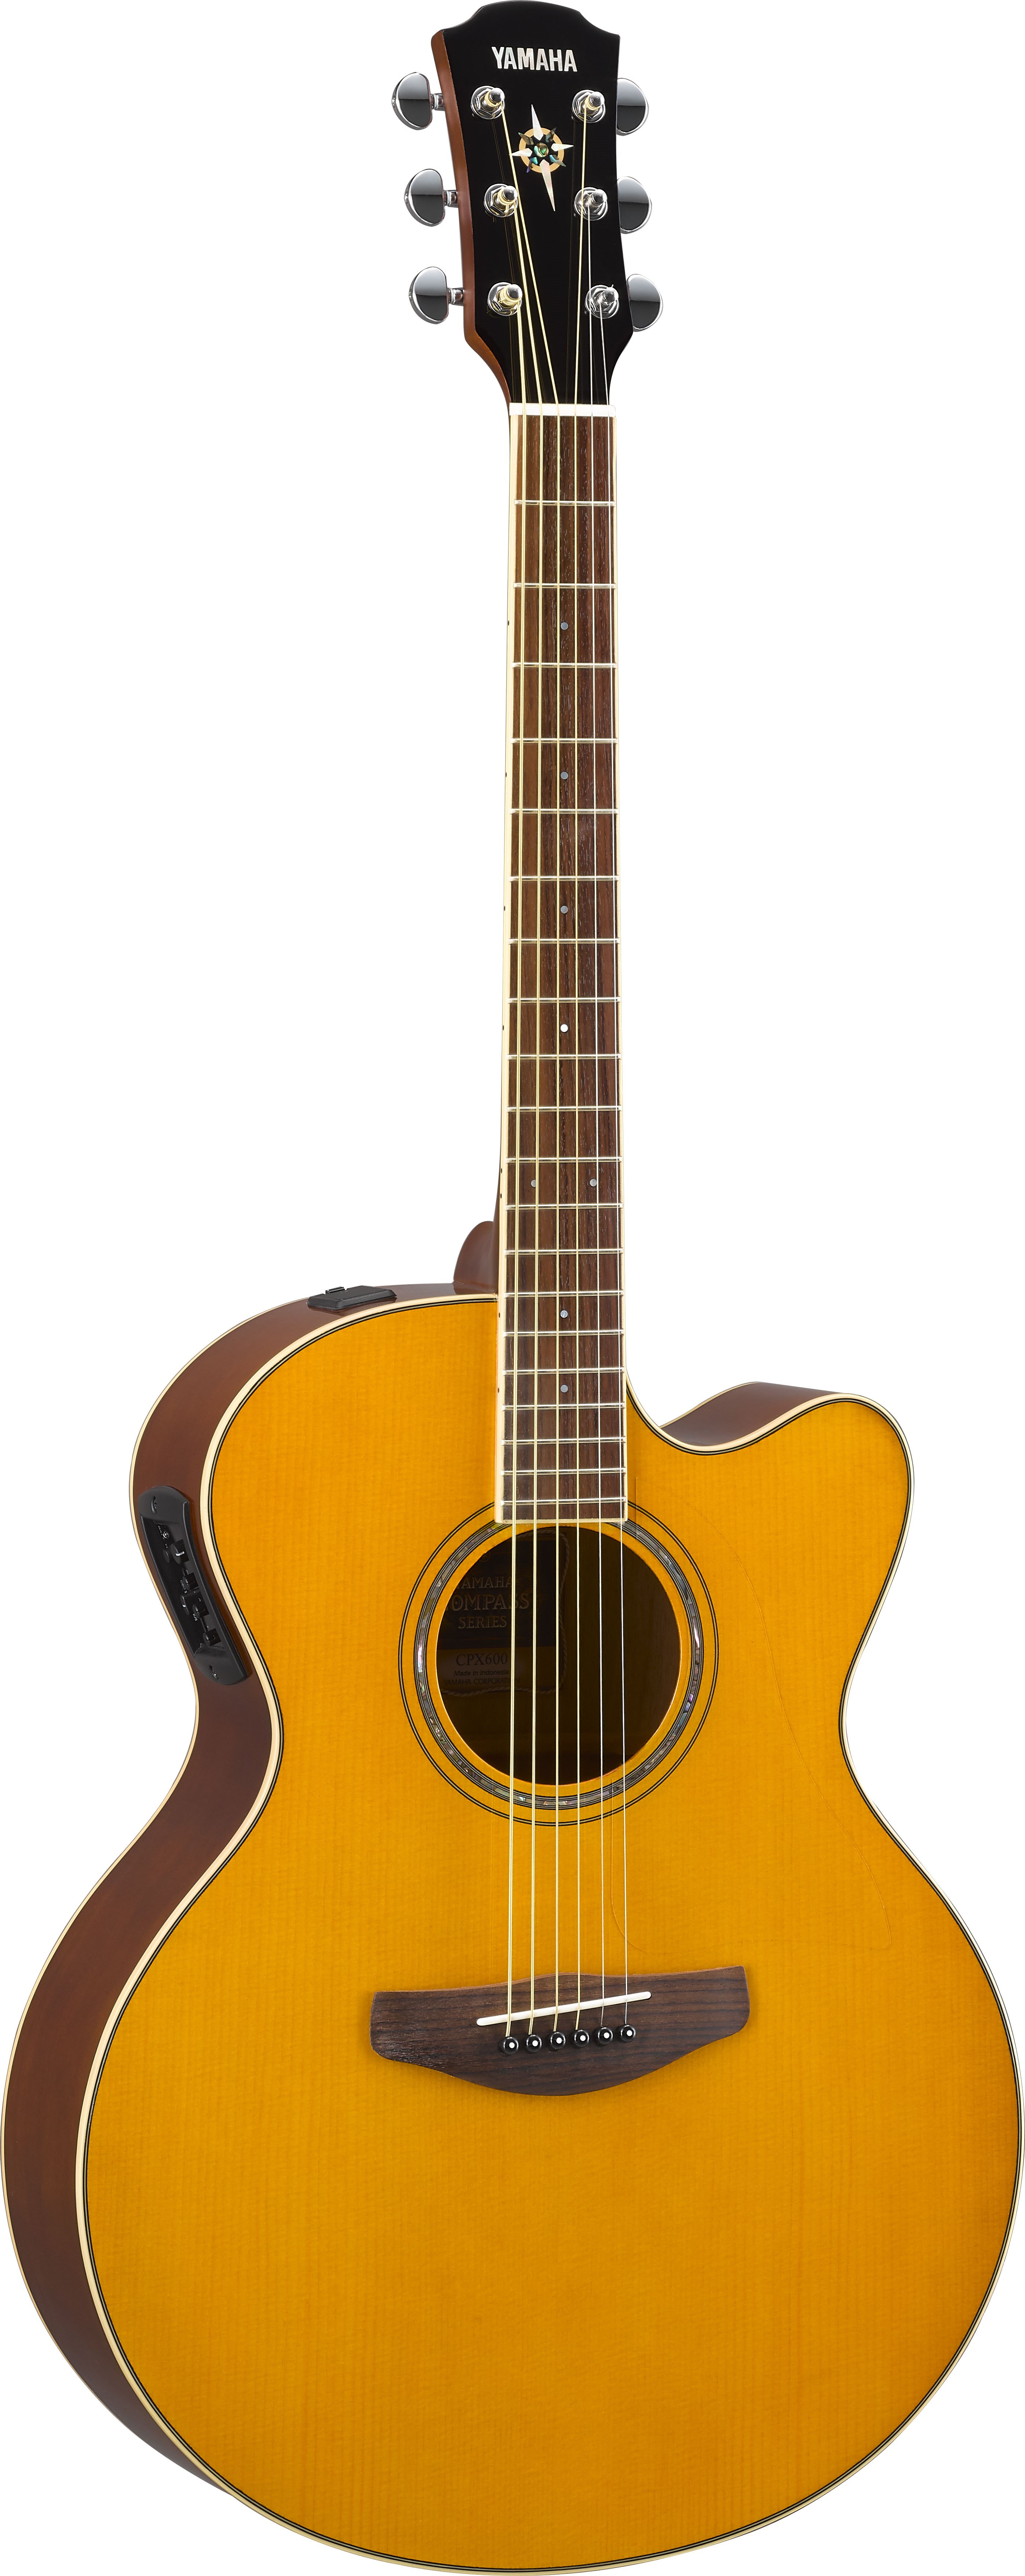 CPX Series - Overview - Acoustic Guitars - Guitars, Basses & Amps